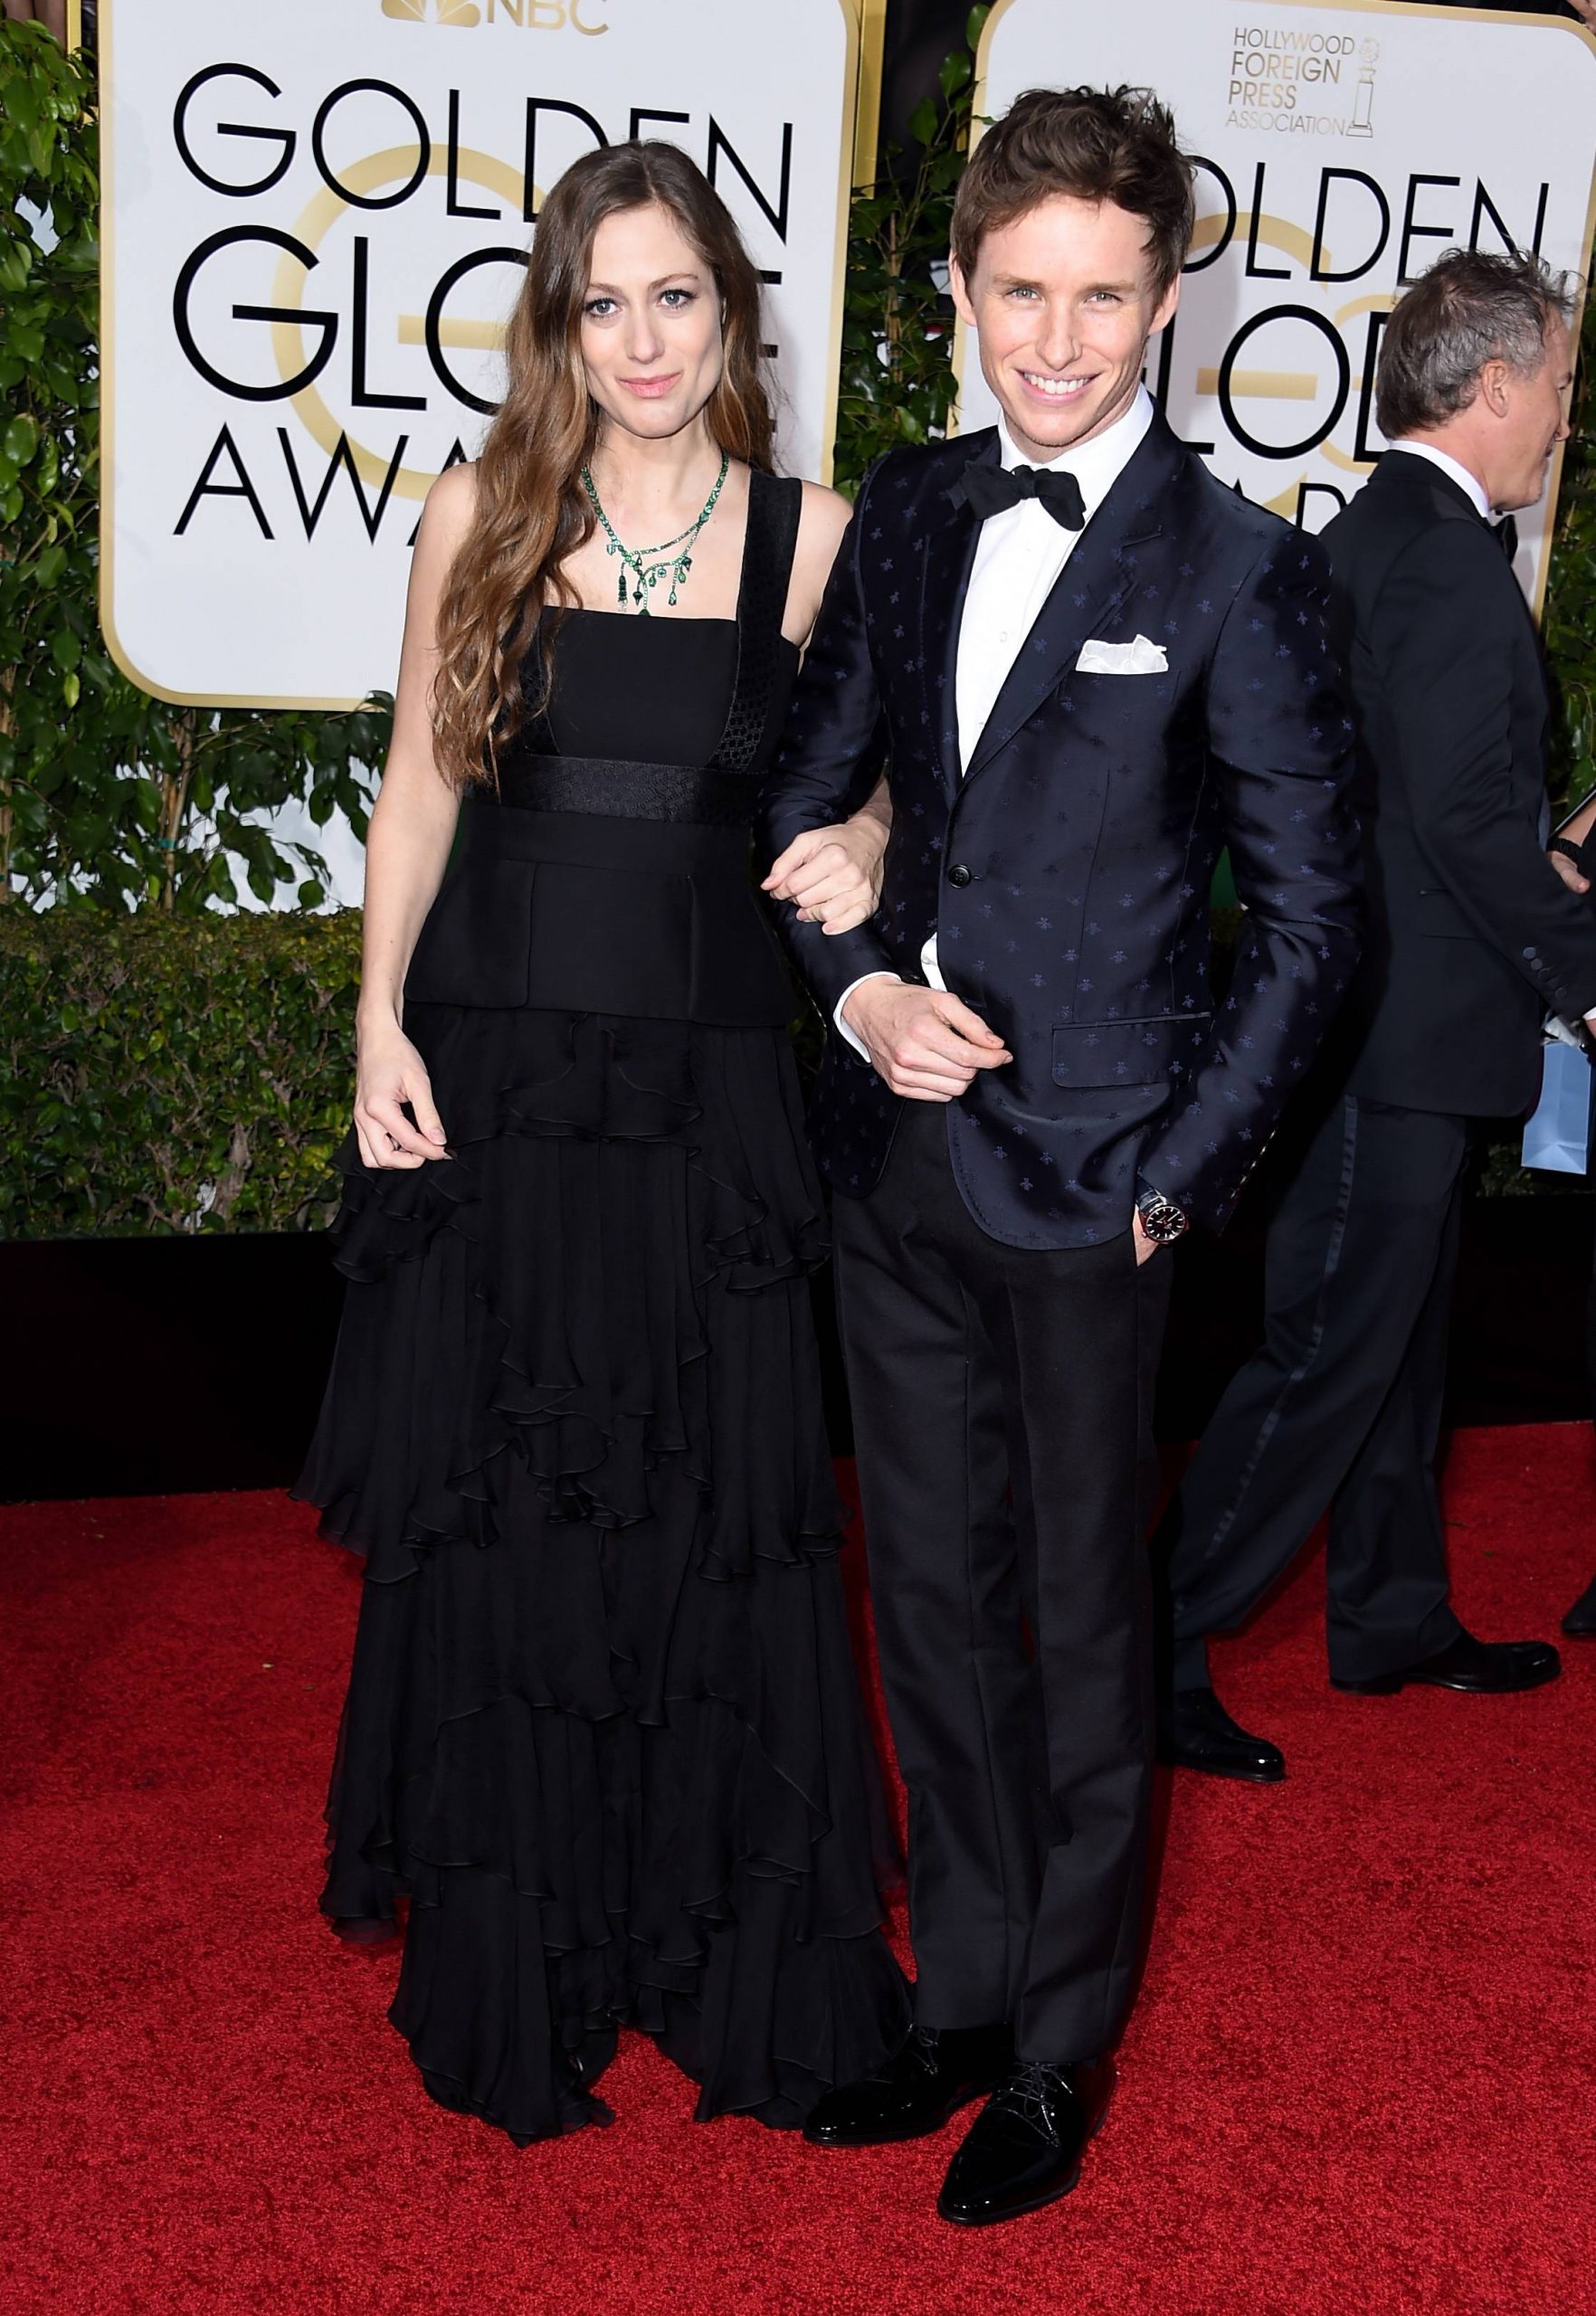 Actor Eddie Redmayne (R) and Hannah Bagshawe attend the 73rd Annual Golden Globe Awards. (Photo by Steve Granitz/WireImage)